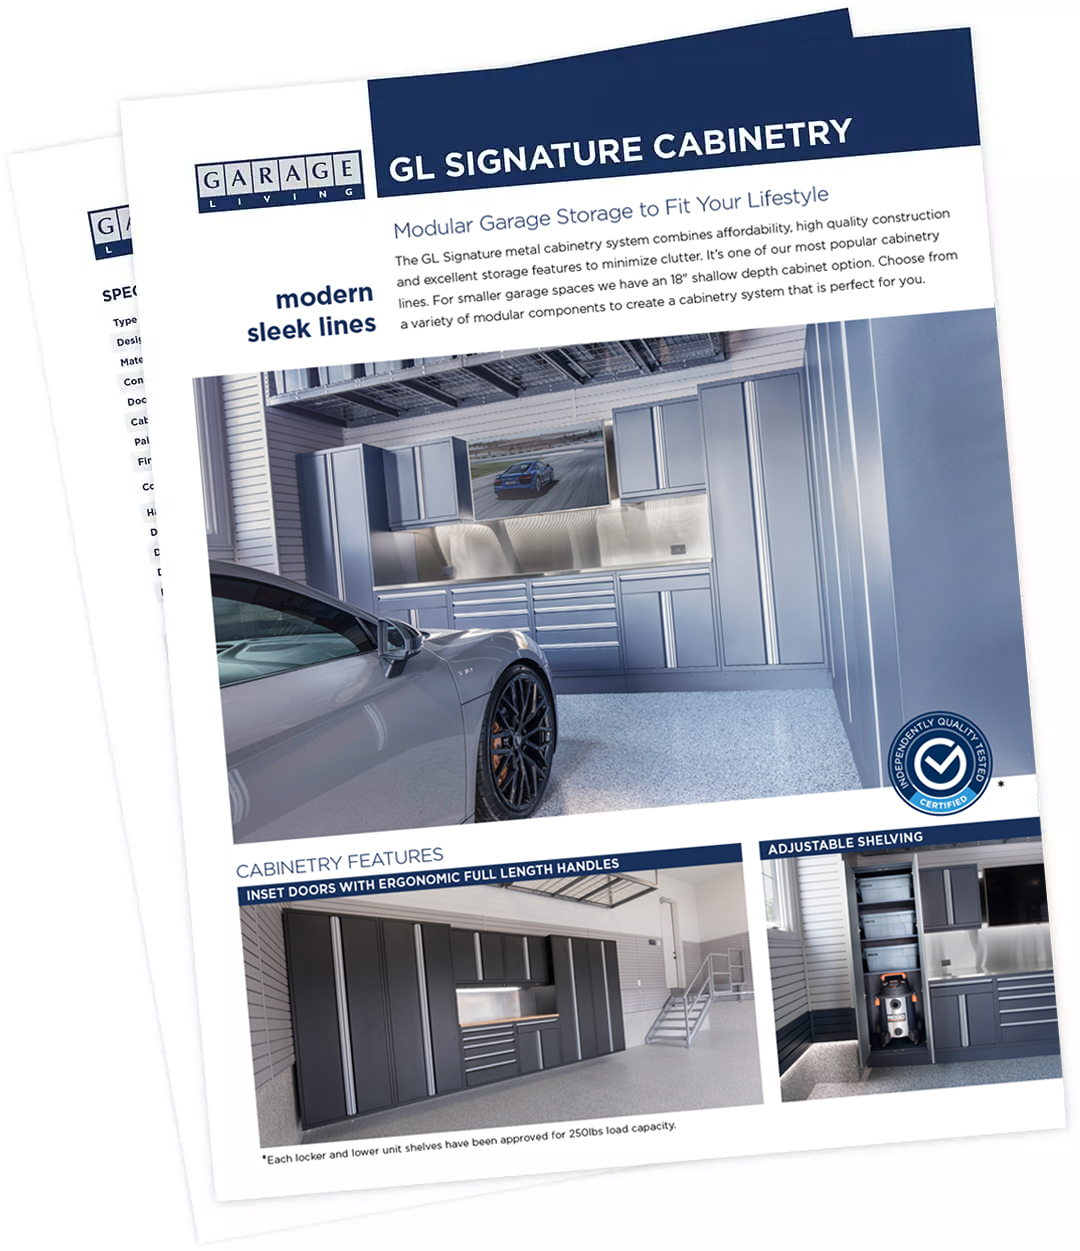 xgl-signature-cabinetry-042921.jpg.pagespeed.ic.xbne3RAPVH